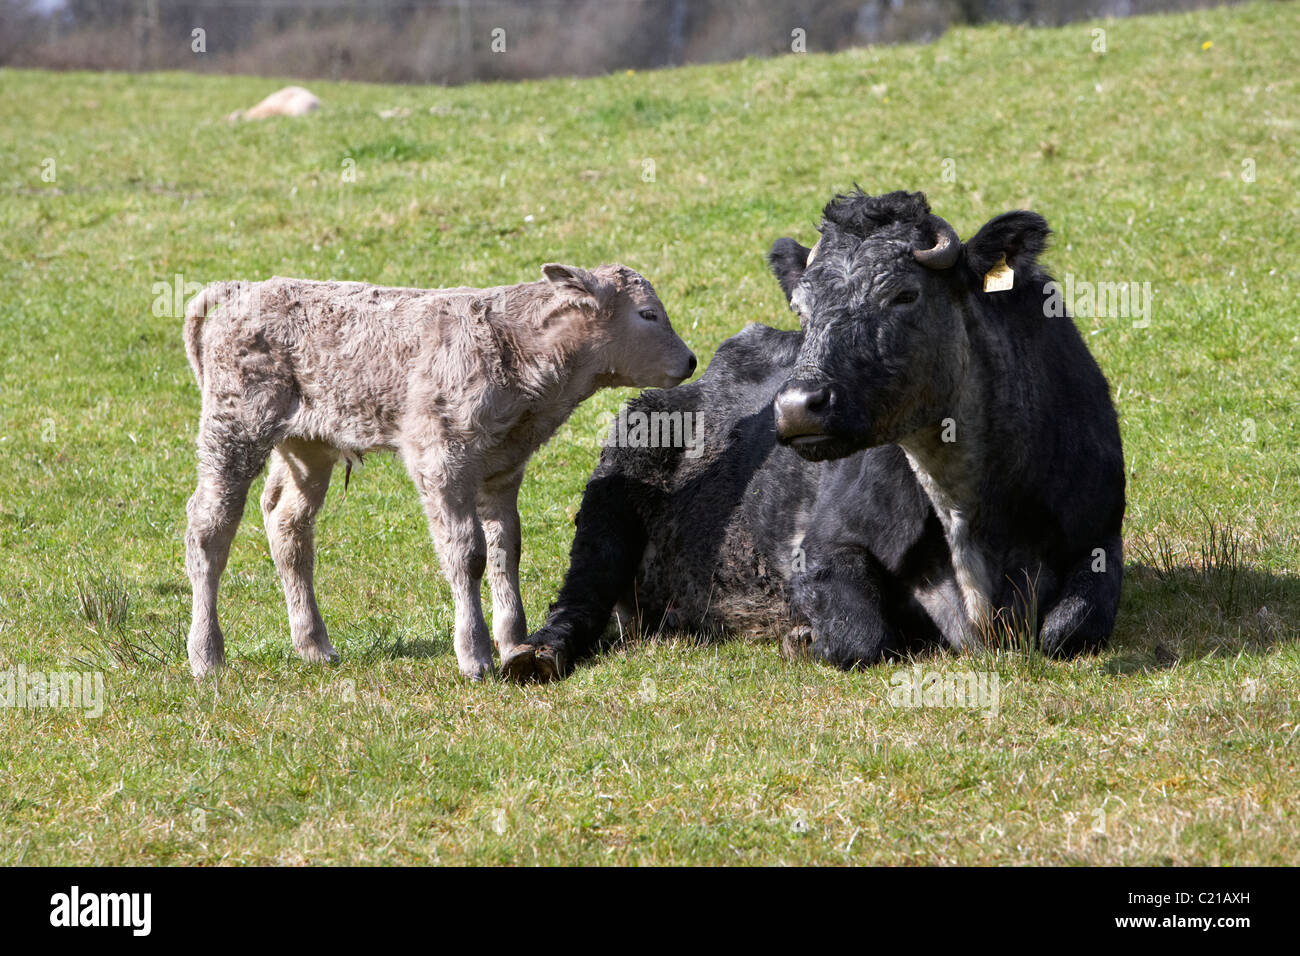 cow and newborn calf in a field in ireland Stock Photo